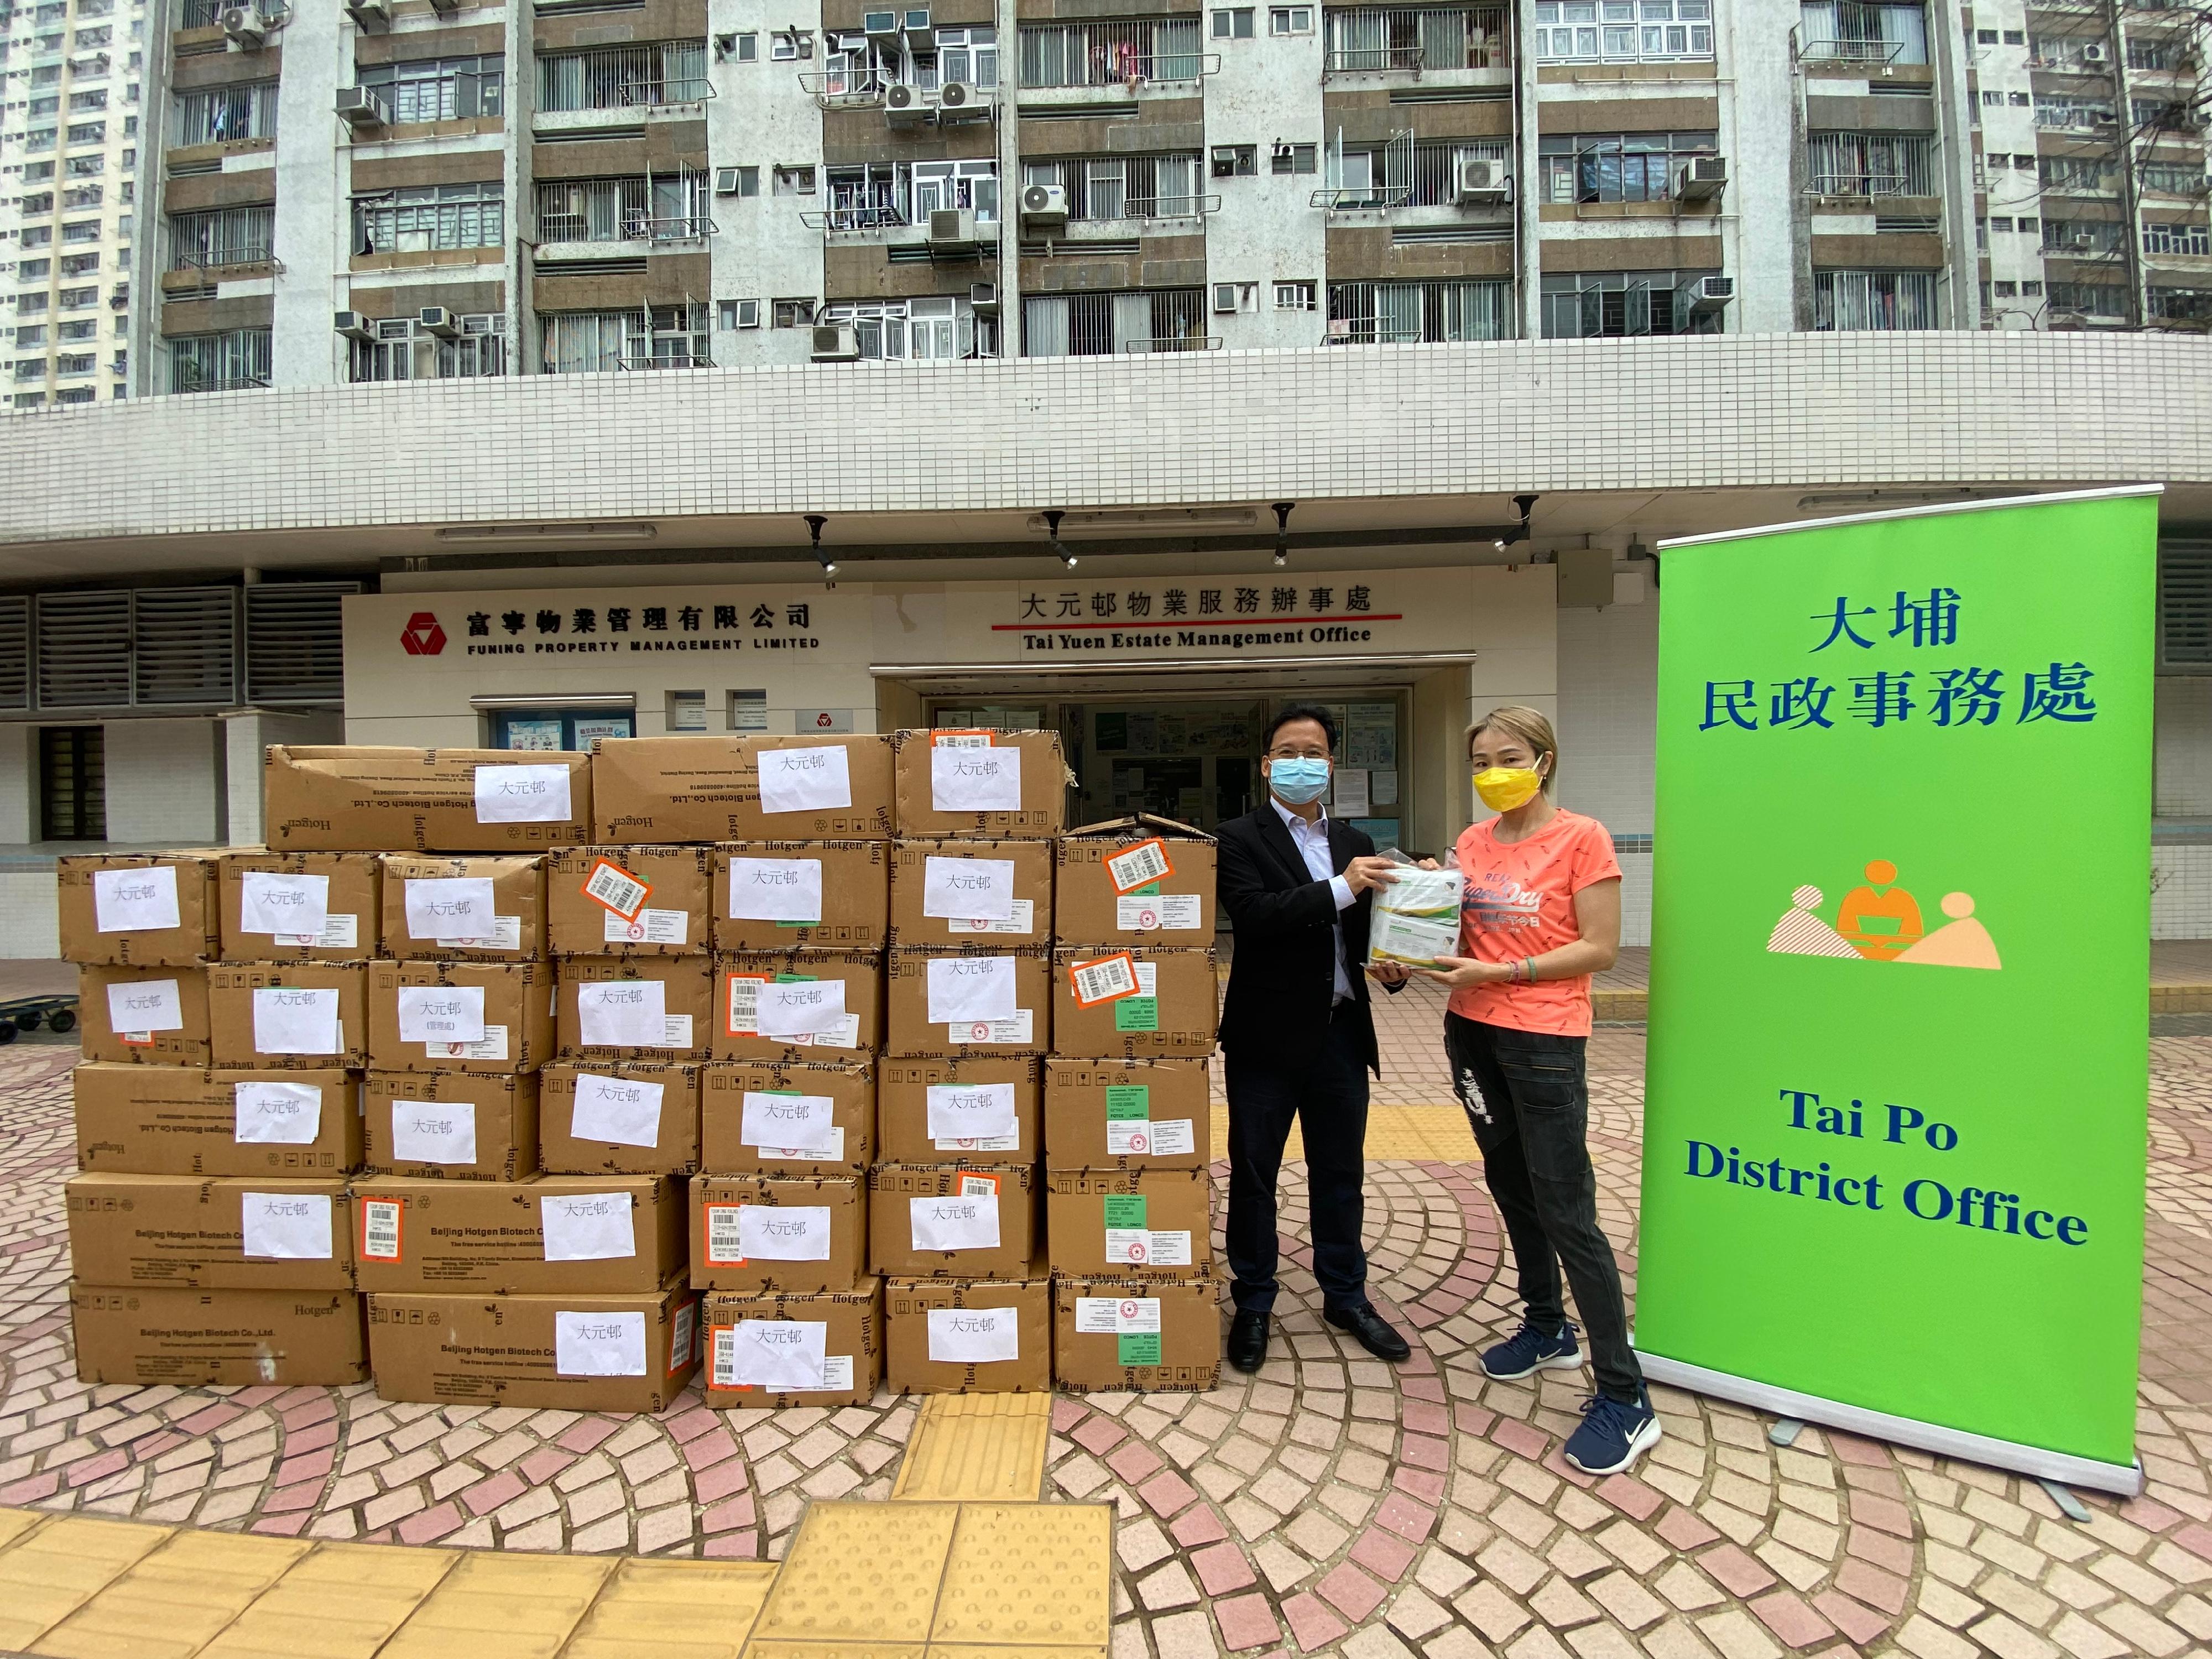 The Tai Po District Office today (March 21) distributed COVID-19 rapid test kits to households, cleansing workers and property management staff living and working in Tai Yuen Estate for voluntary testing through the property management company.